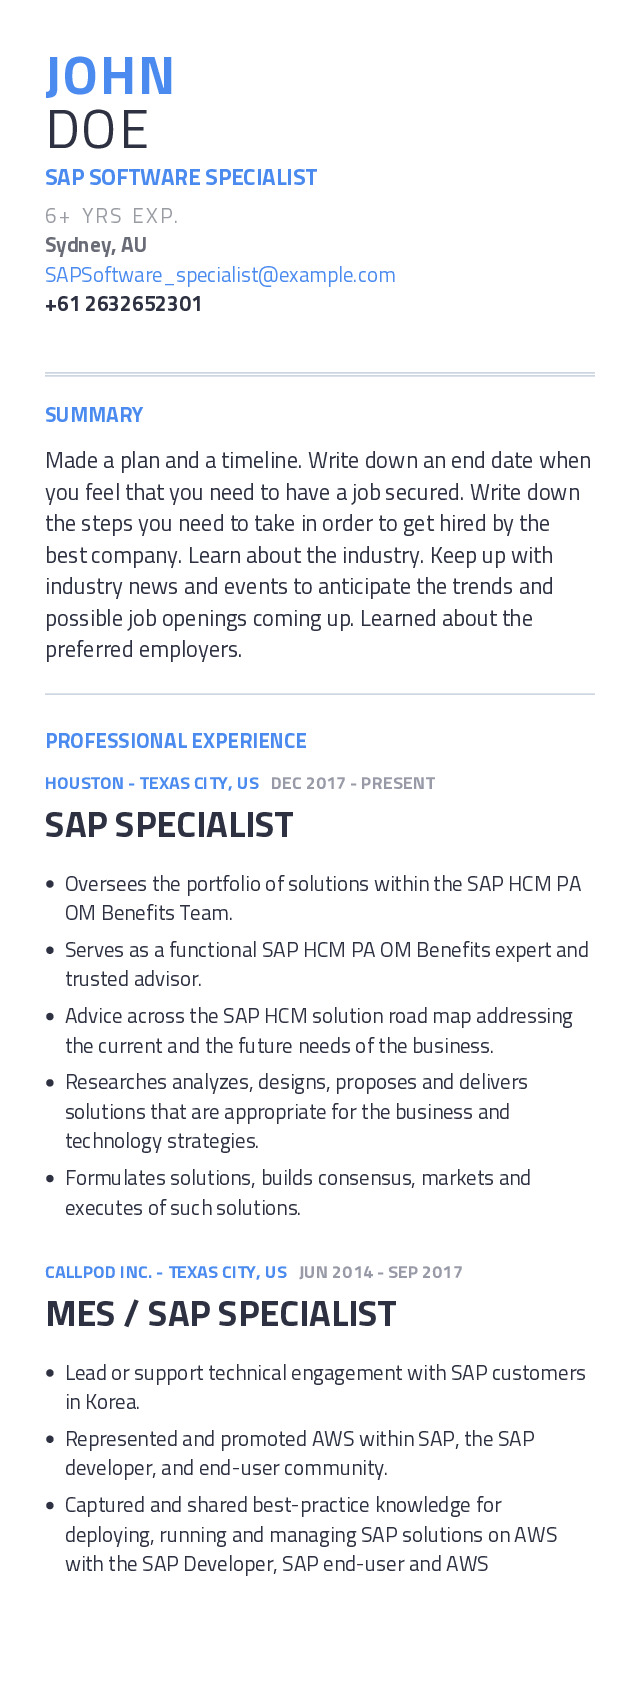 SAP Software Specialist Mobile Resume Example